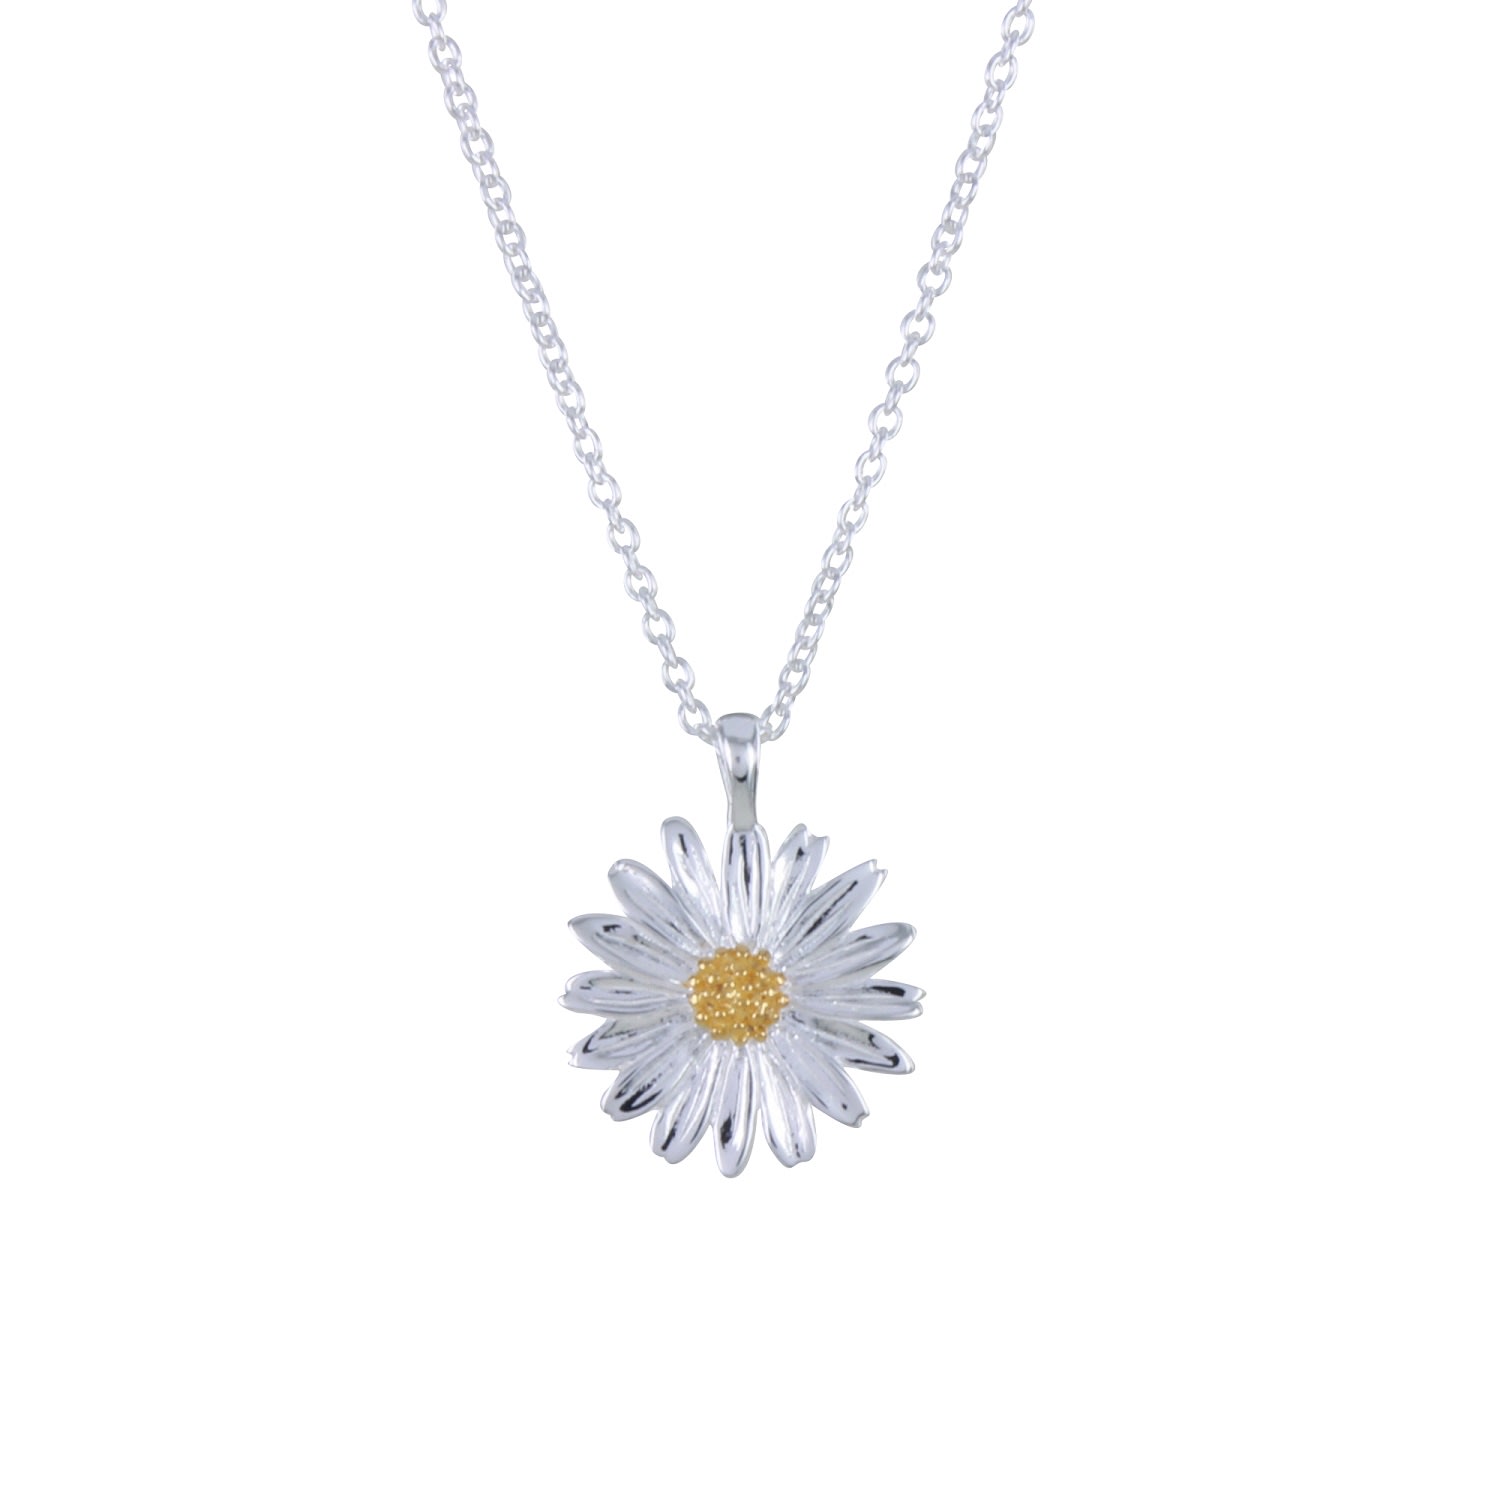 Reeves & Reeves Women's Silver / Gold Sterling Silver Daisy Necklace In Metallic